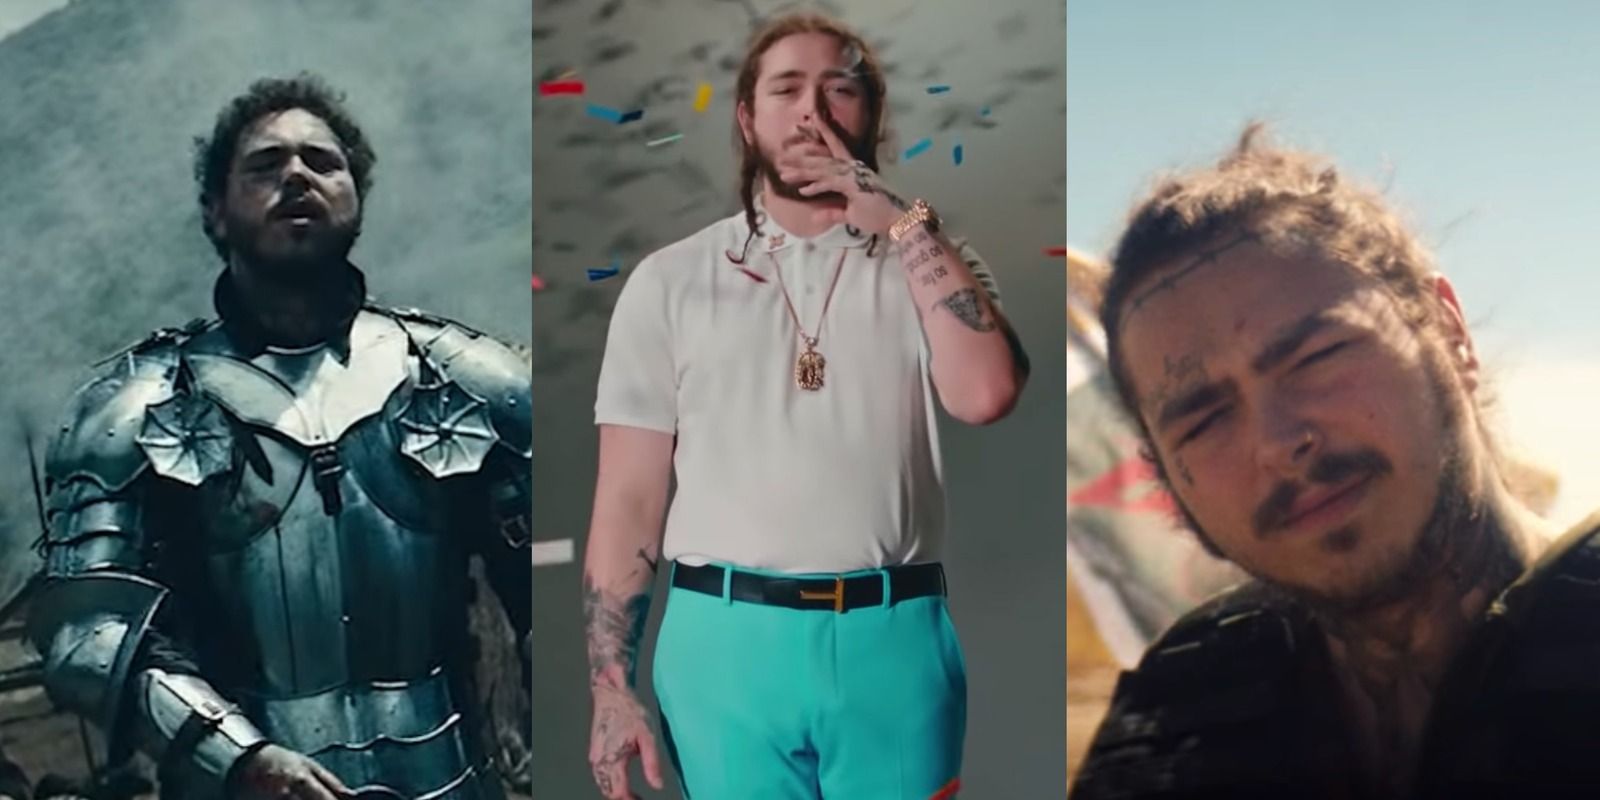 10 Best Post Malone Songs, According To Spotify